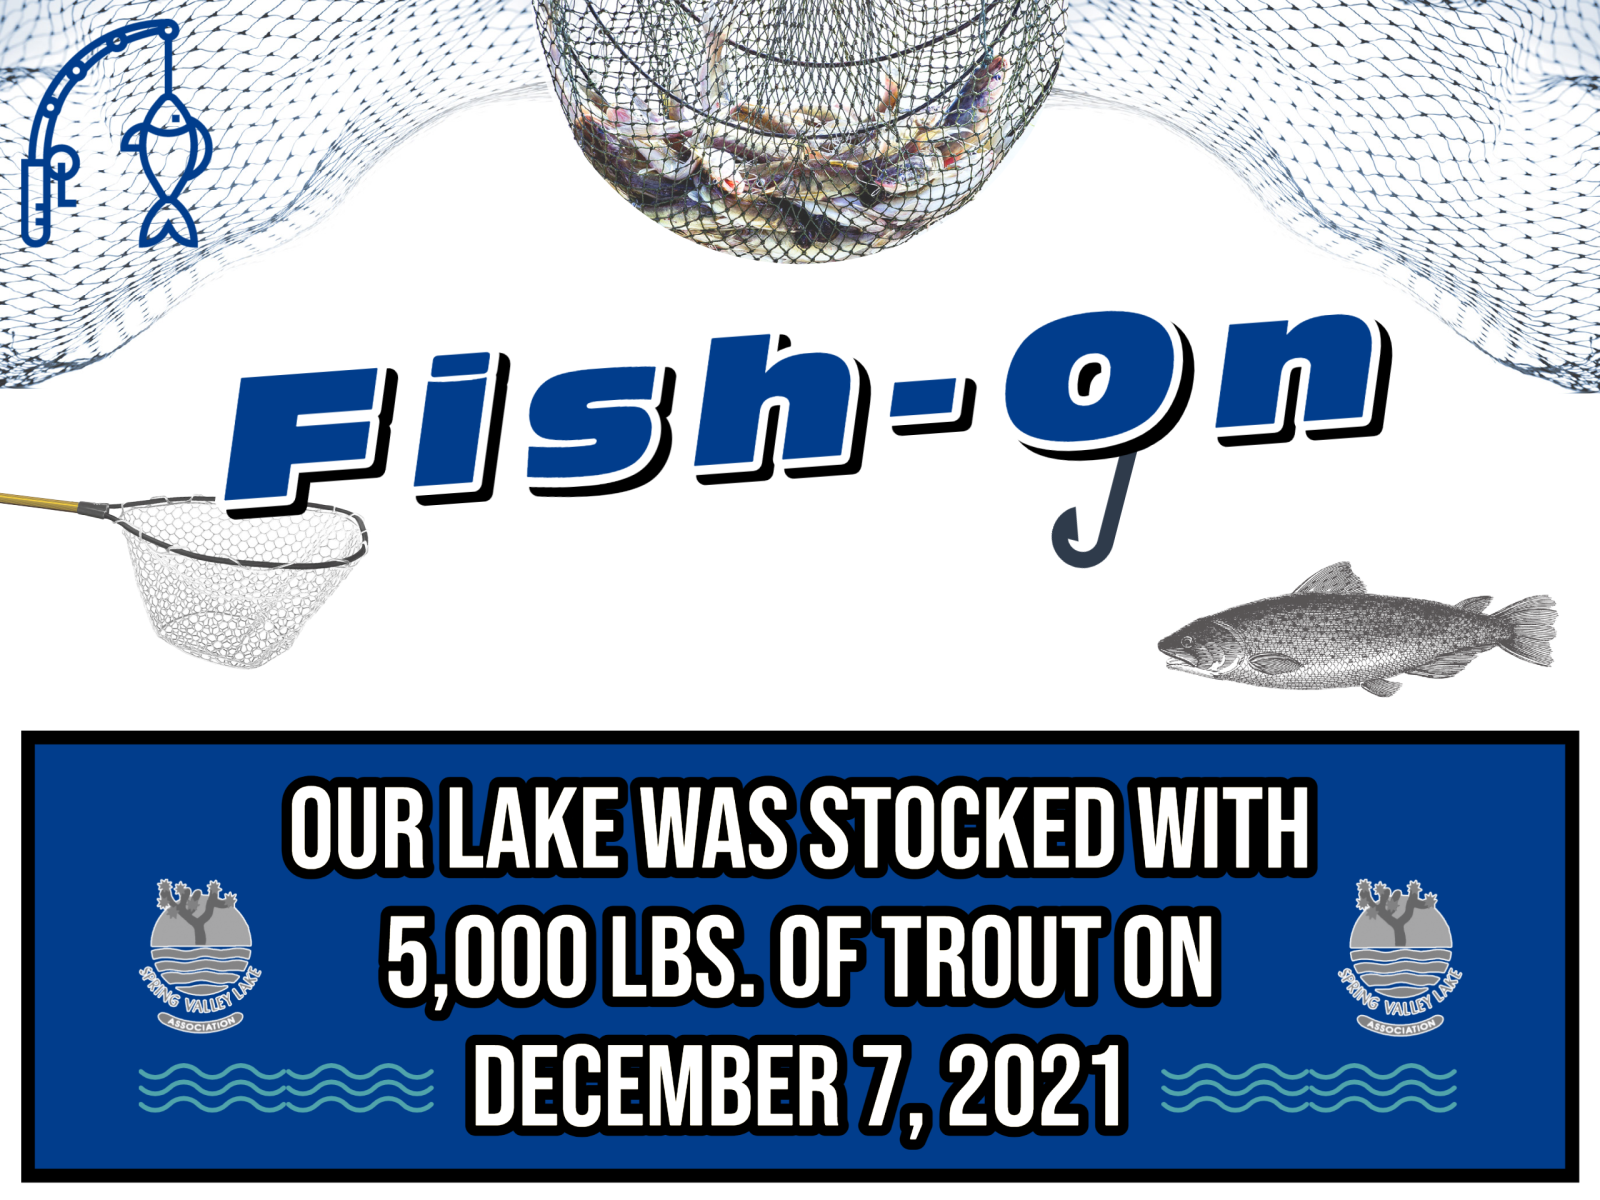 Fish-on; our lake was stocked with 5,000 lbs. of trout on December 7, 2021